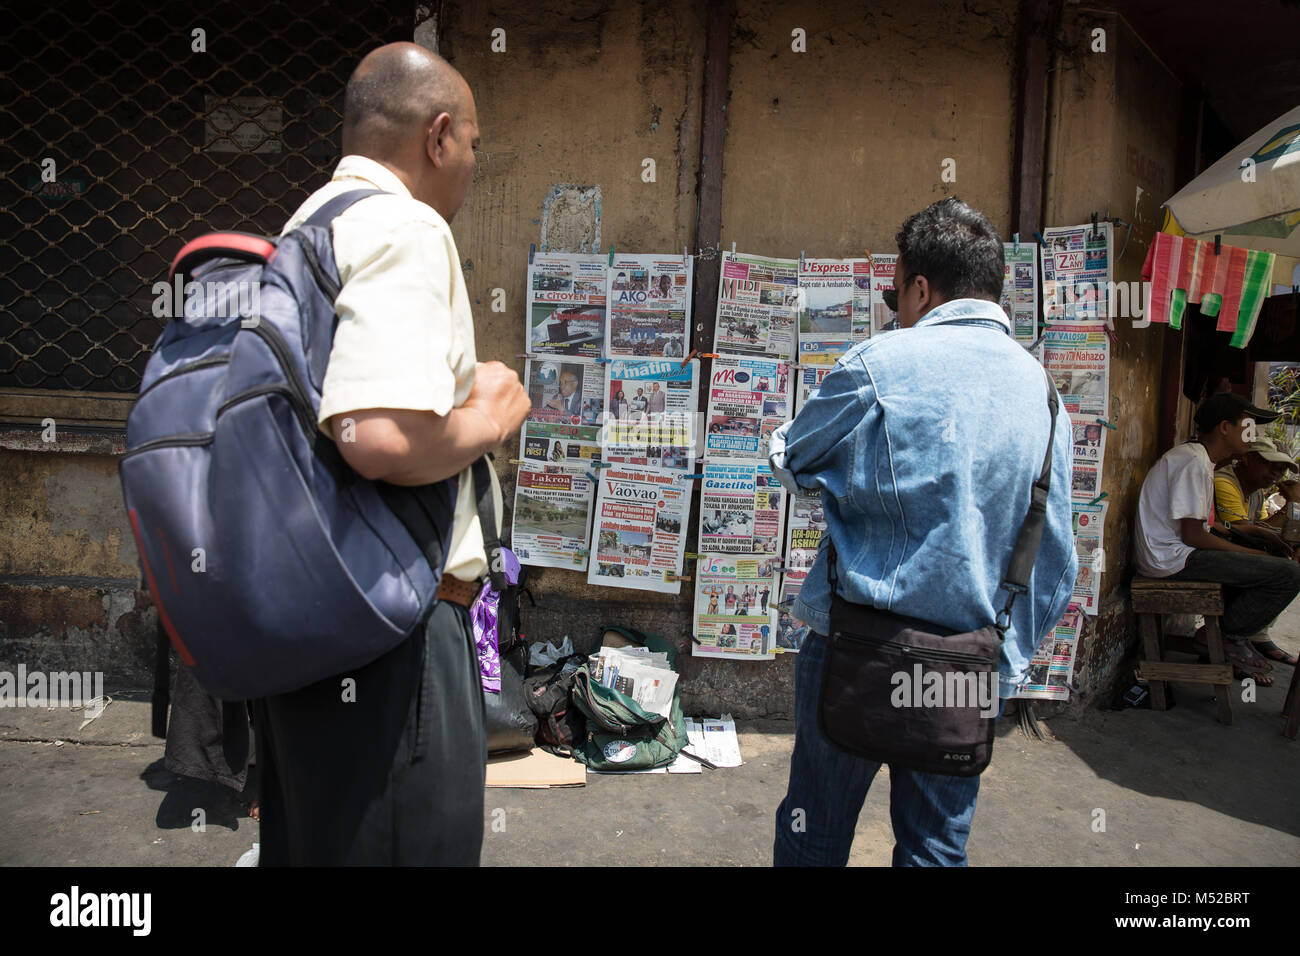 Madagascans read newspaper front pages in central Antananarivo. Many cannot afford to buy the full paper, but it still provides them with essential information about the plague outbreak. Madagascar is suffering from its worst plague outbreak in at least 50 years. Stock Photo